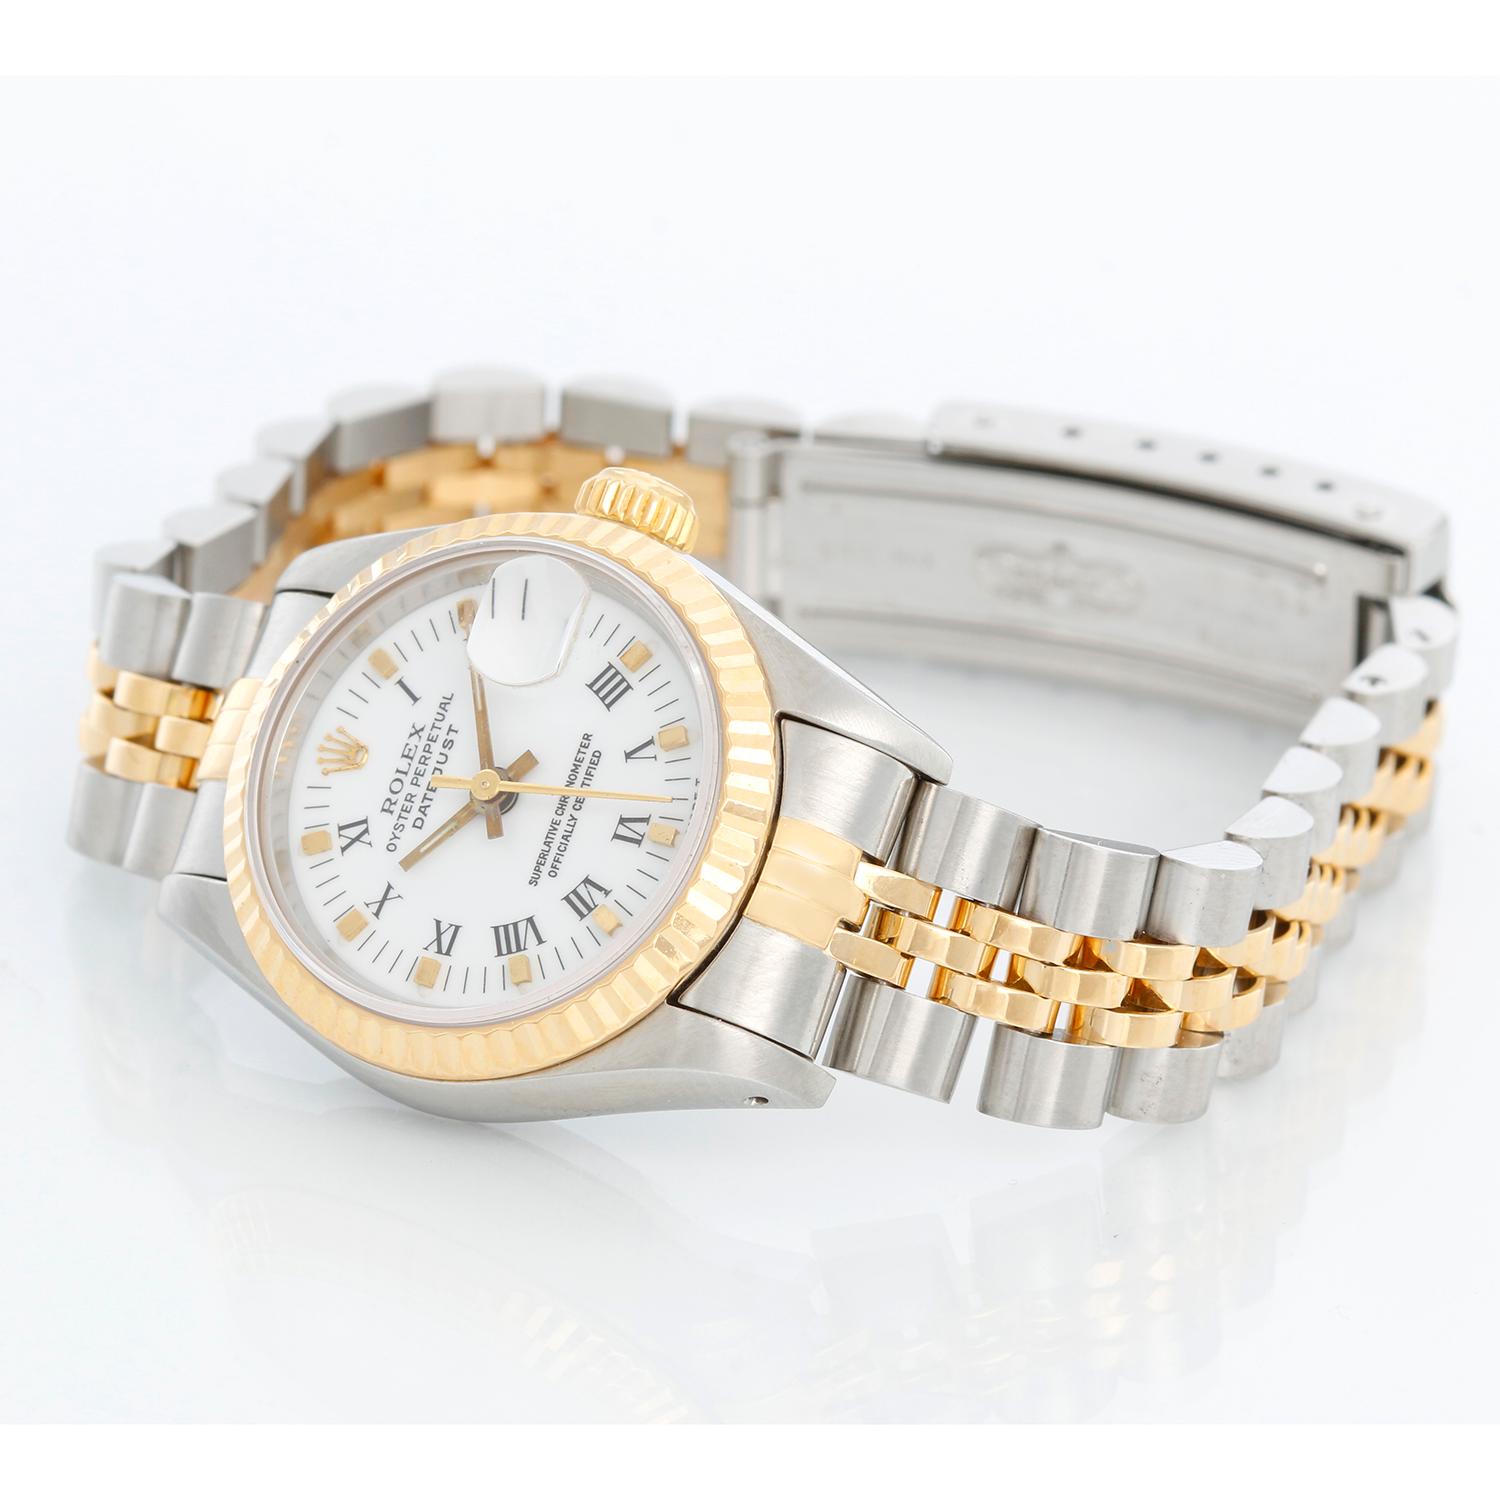 Rolex  2-Tone Datejust Steel & Gold Ladies Watch 69173 - Automatic winding, 29 jewels, Quickset date, sapphire crystal. Stainless steel case with fluted bezel. White dial with Roman numerals and gold markers . Stainless steel and 18k yellow gold